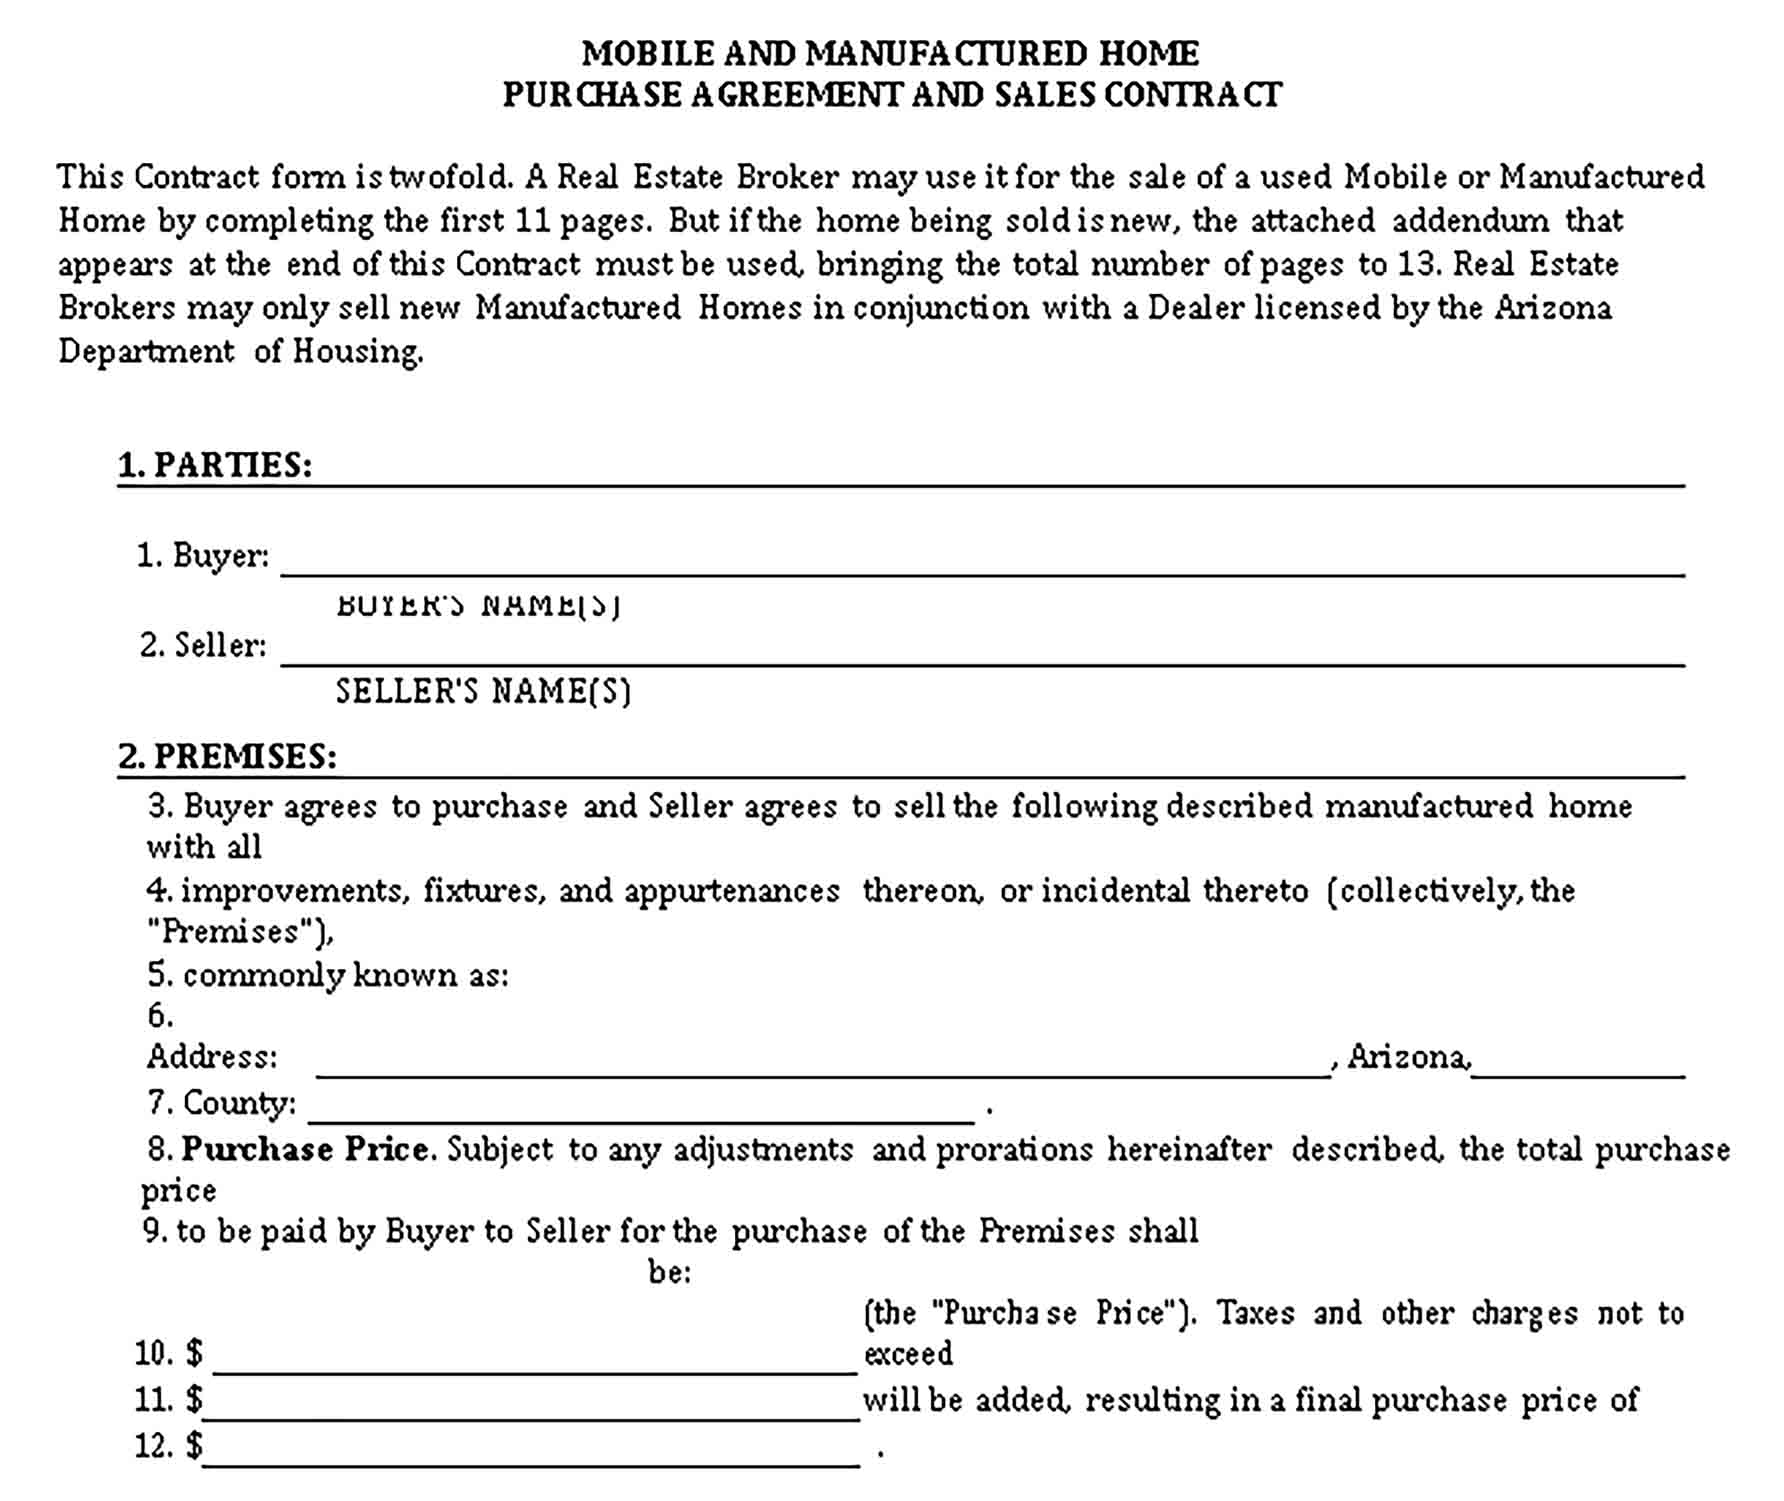 Templates Mobile and Manufactured Home Purchase Agreement Sample